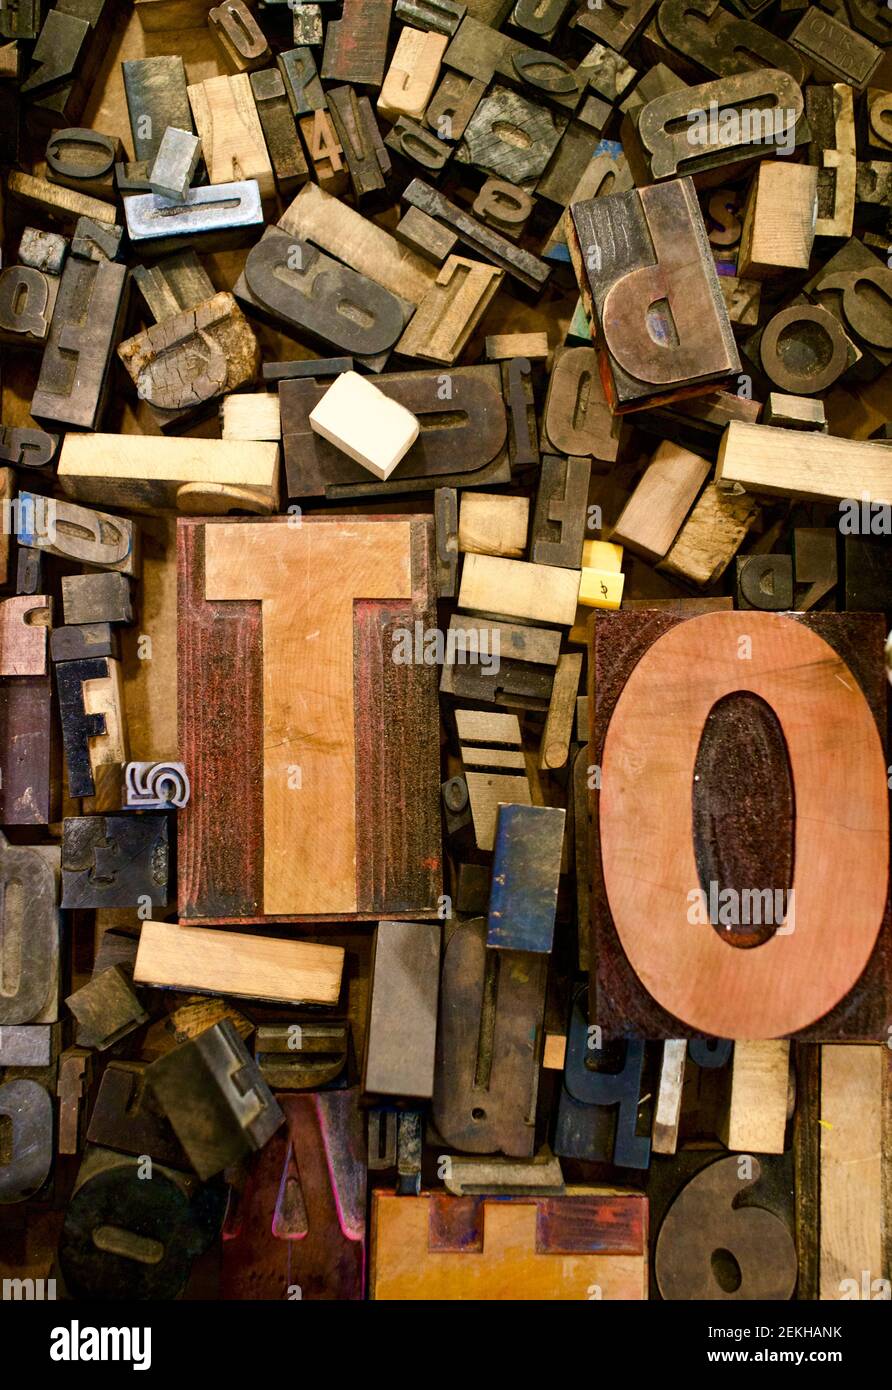 Loose type in collection of various fonts, letters, sizes, and material.  Good for background, or themes on words and language. Stock Photo